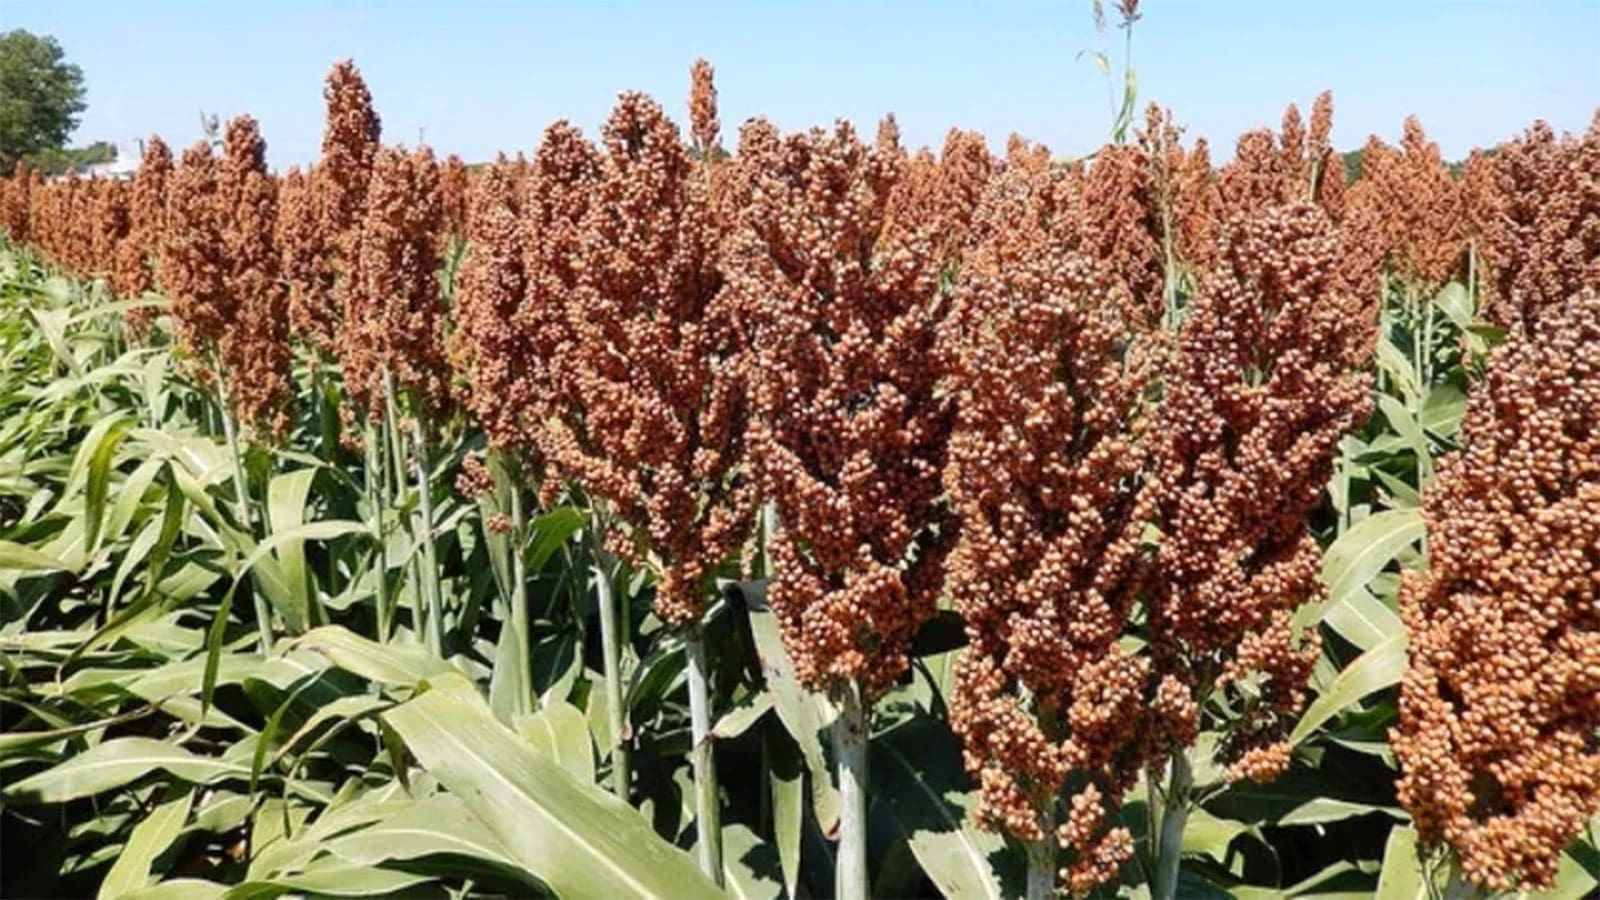 Flavonoids from sorghum may protect corn from fall armyworm